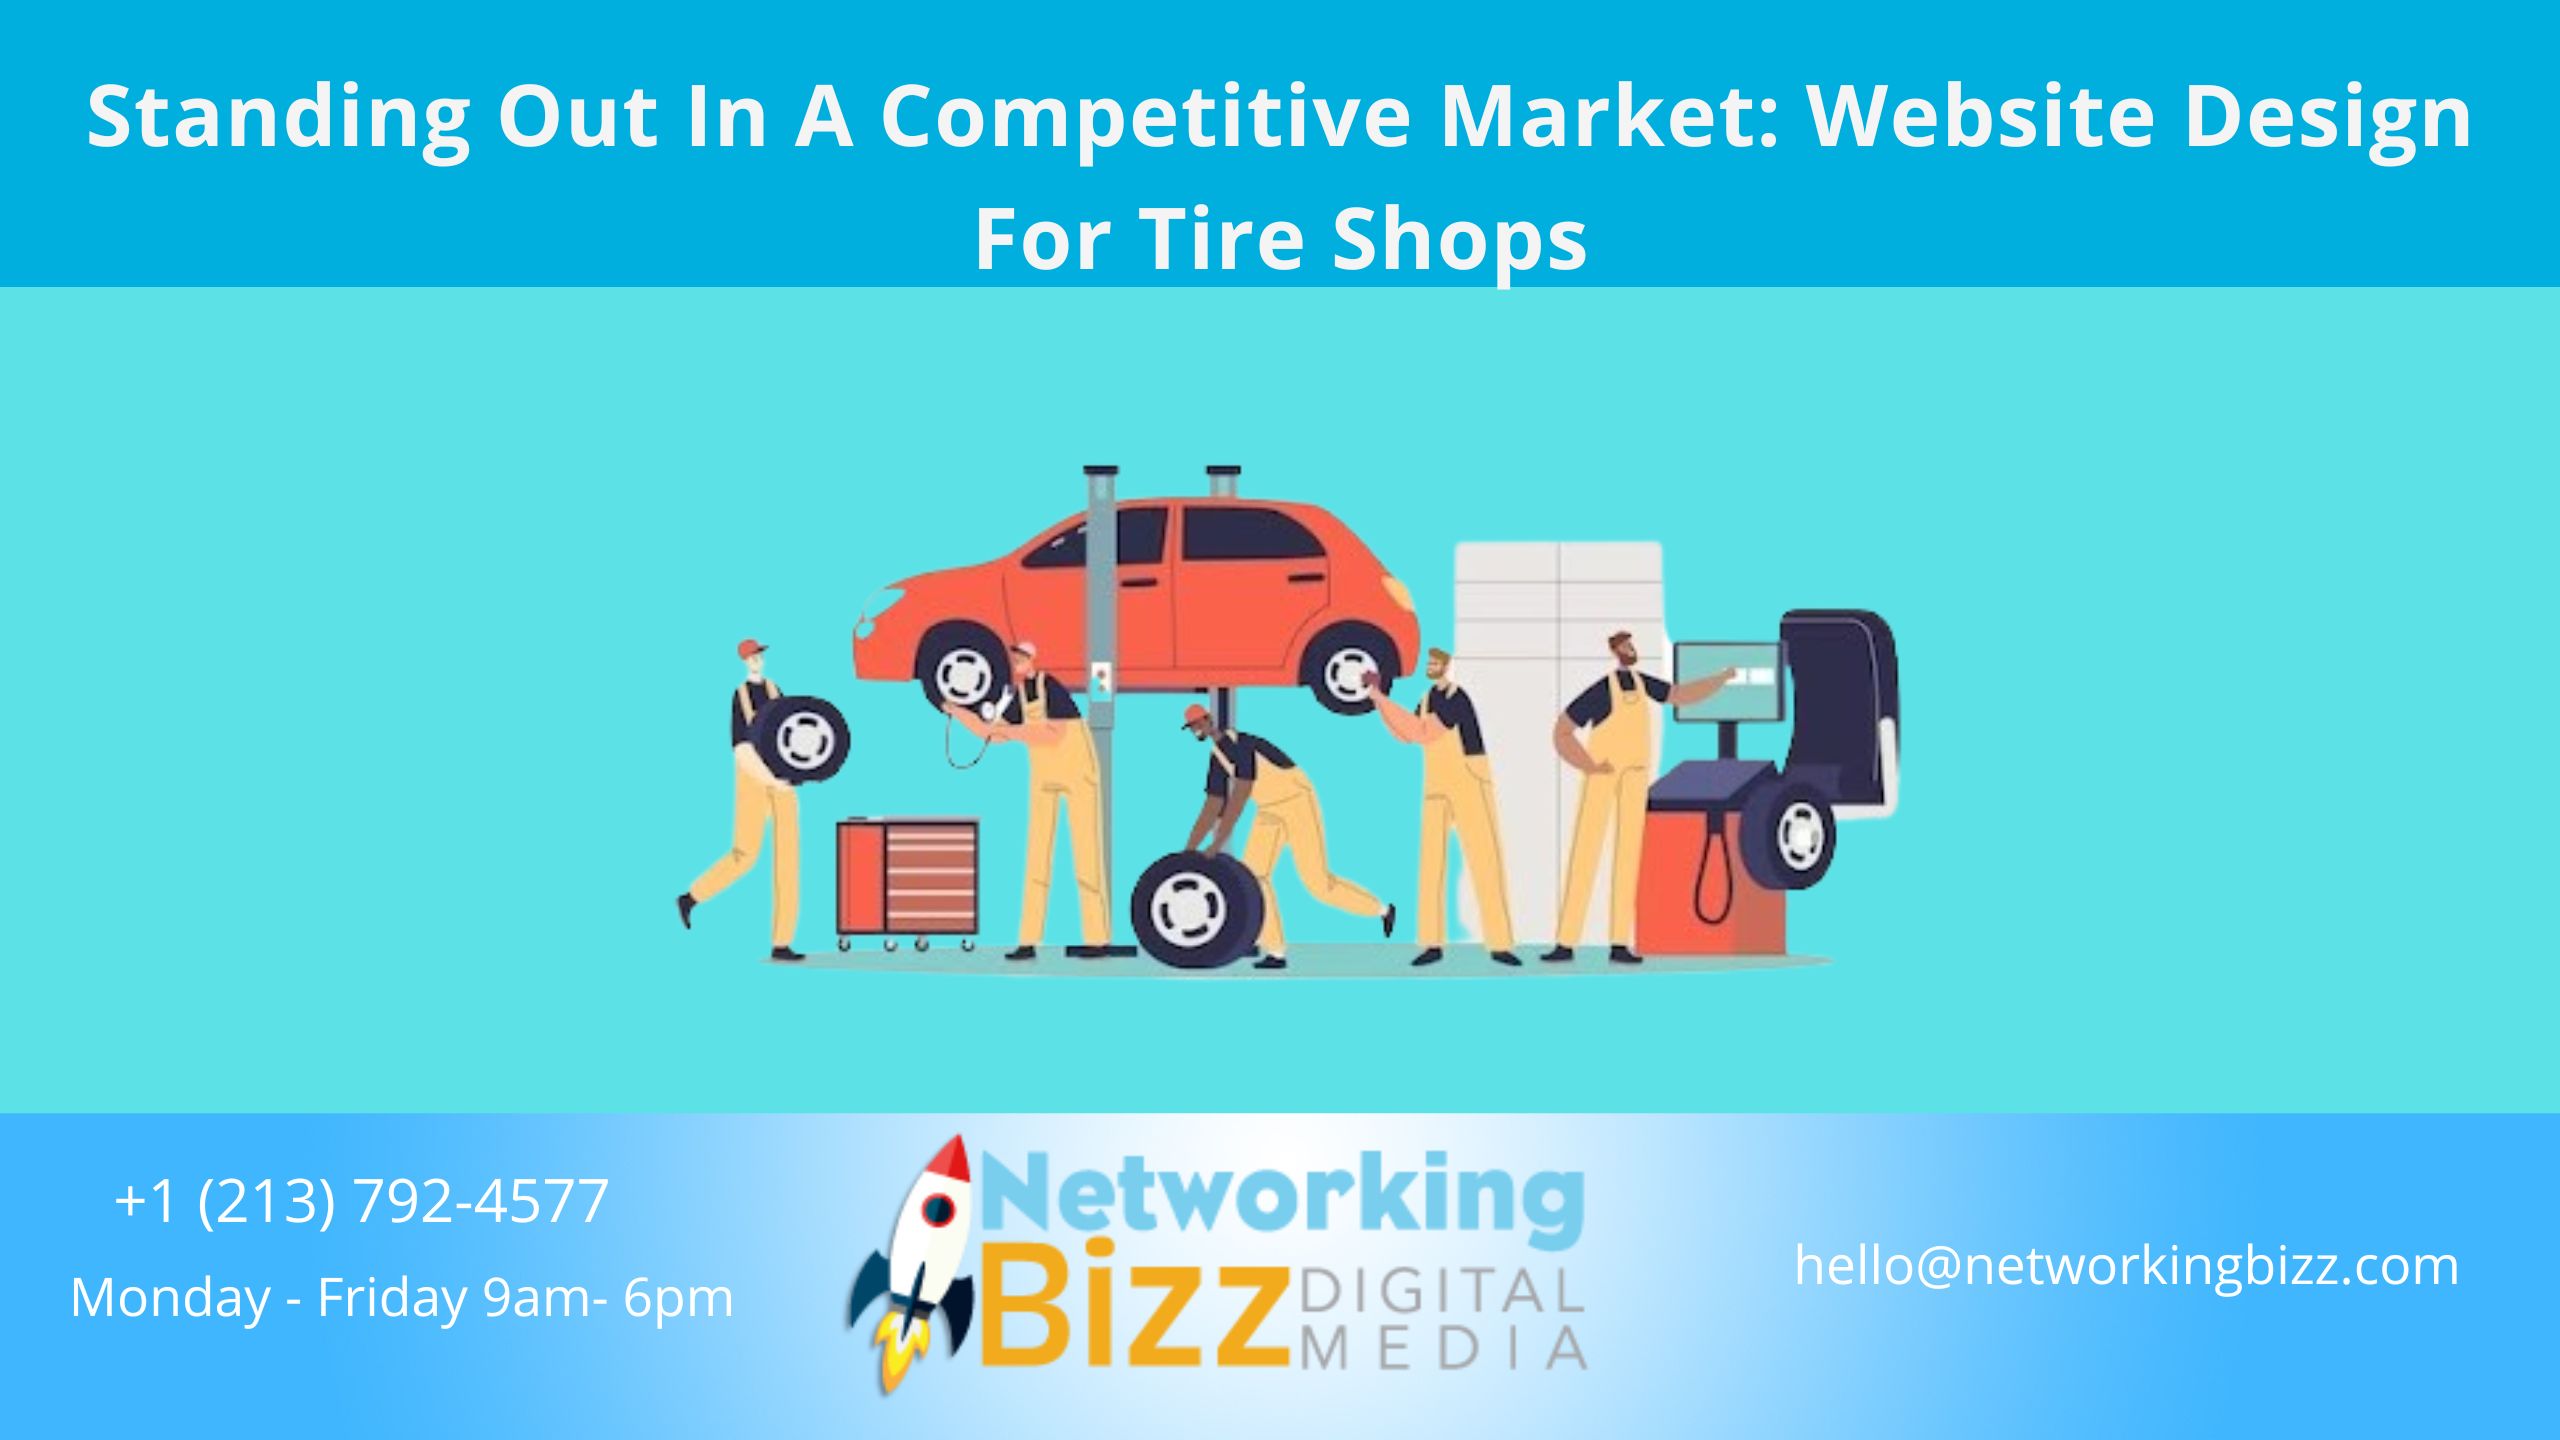 Standing Out In A Competitive Market: Website Design For Tire Shops